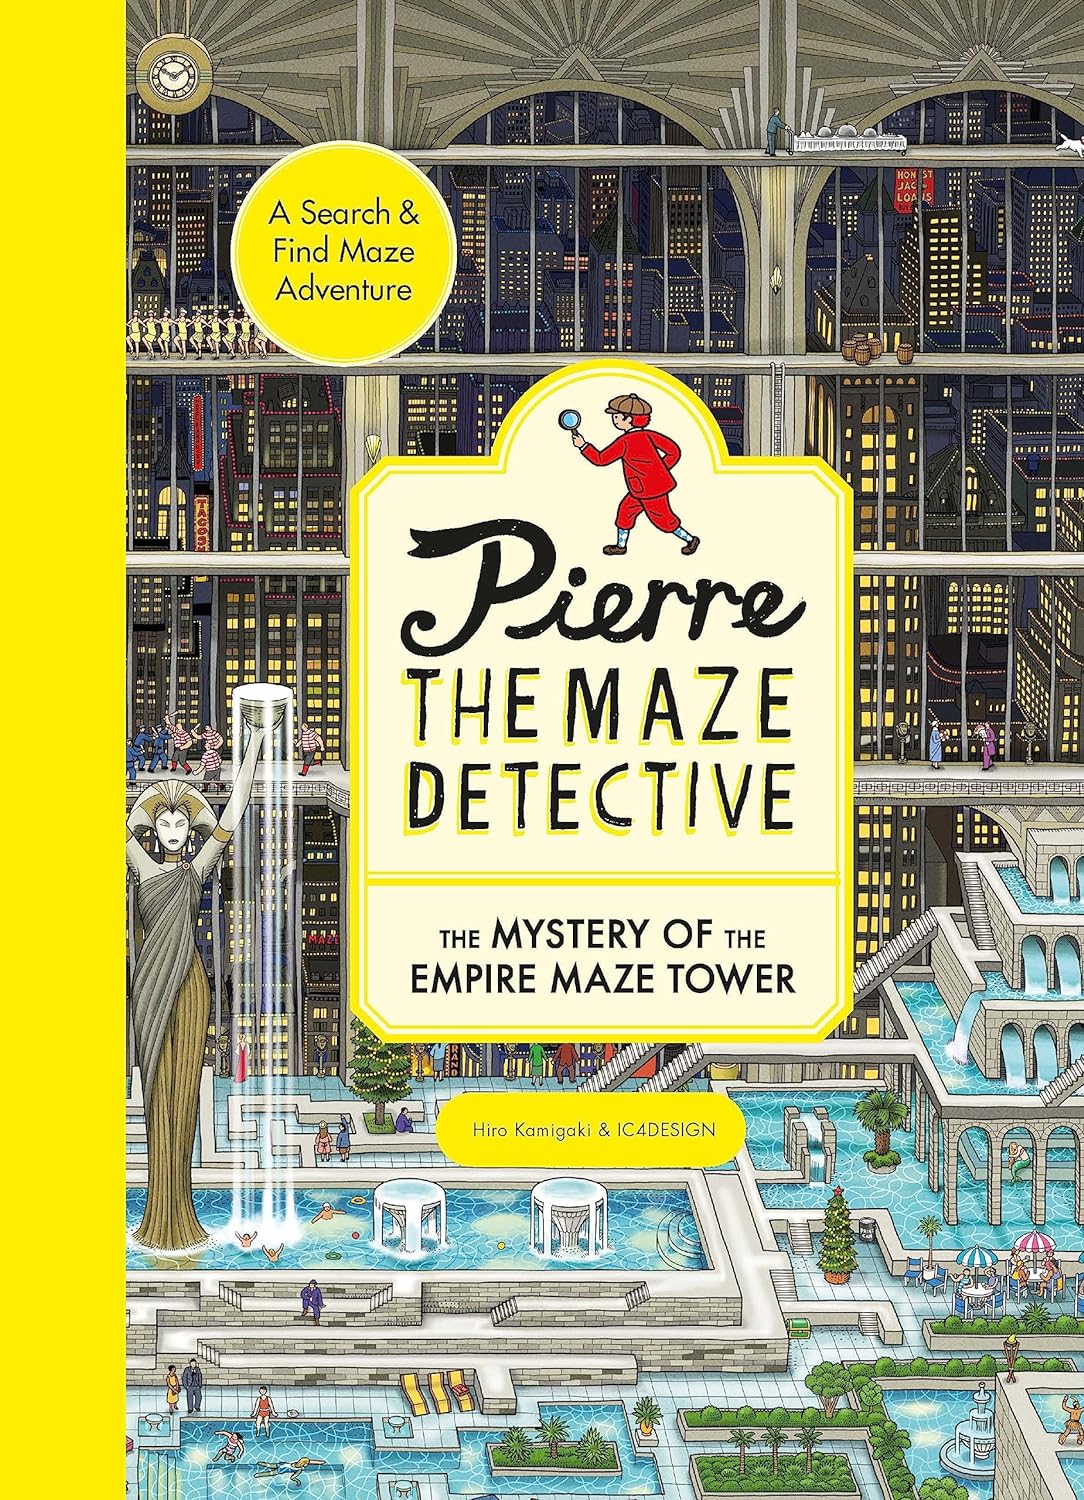 Pierre the Maze Detective, The Mystery of the Empire Maze Tower by Hiro Kamigaki & IC4DESIGN